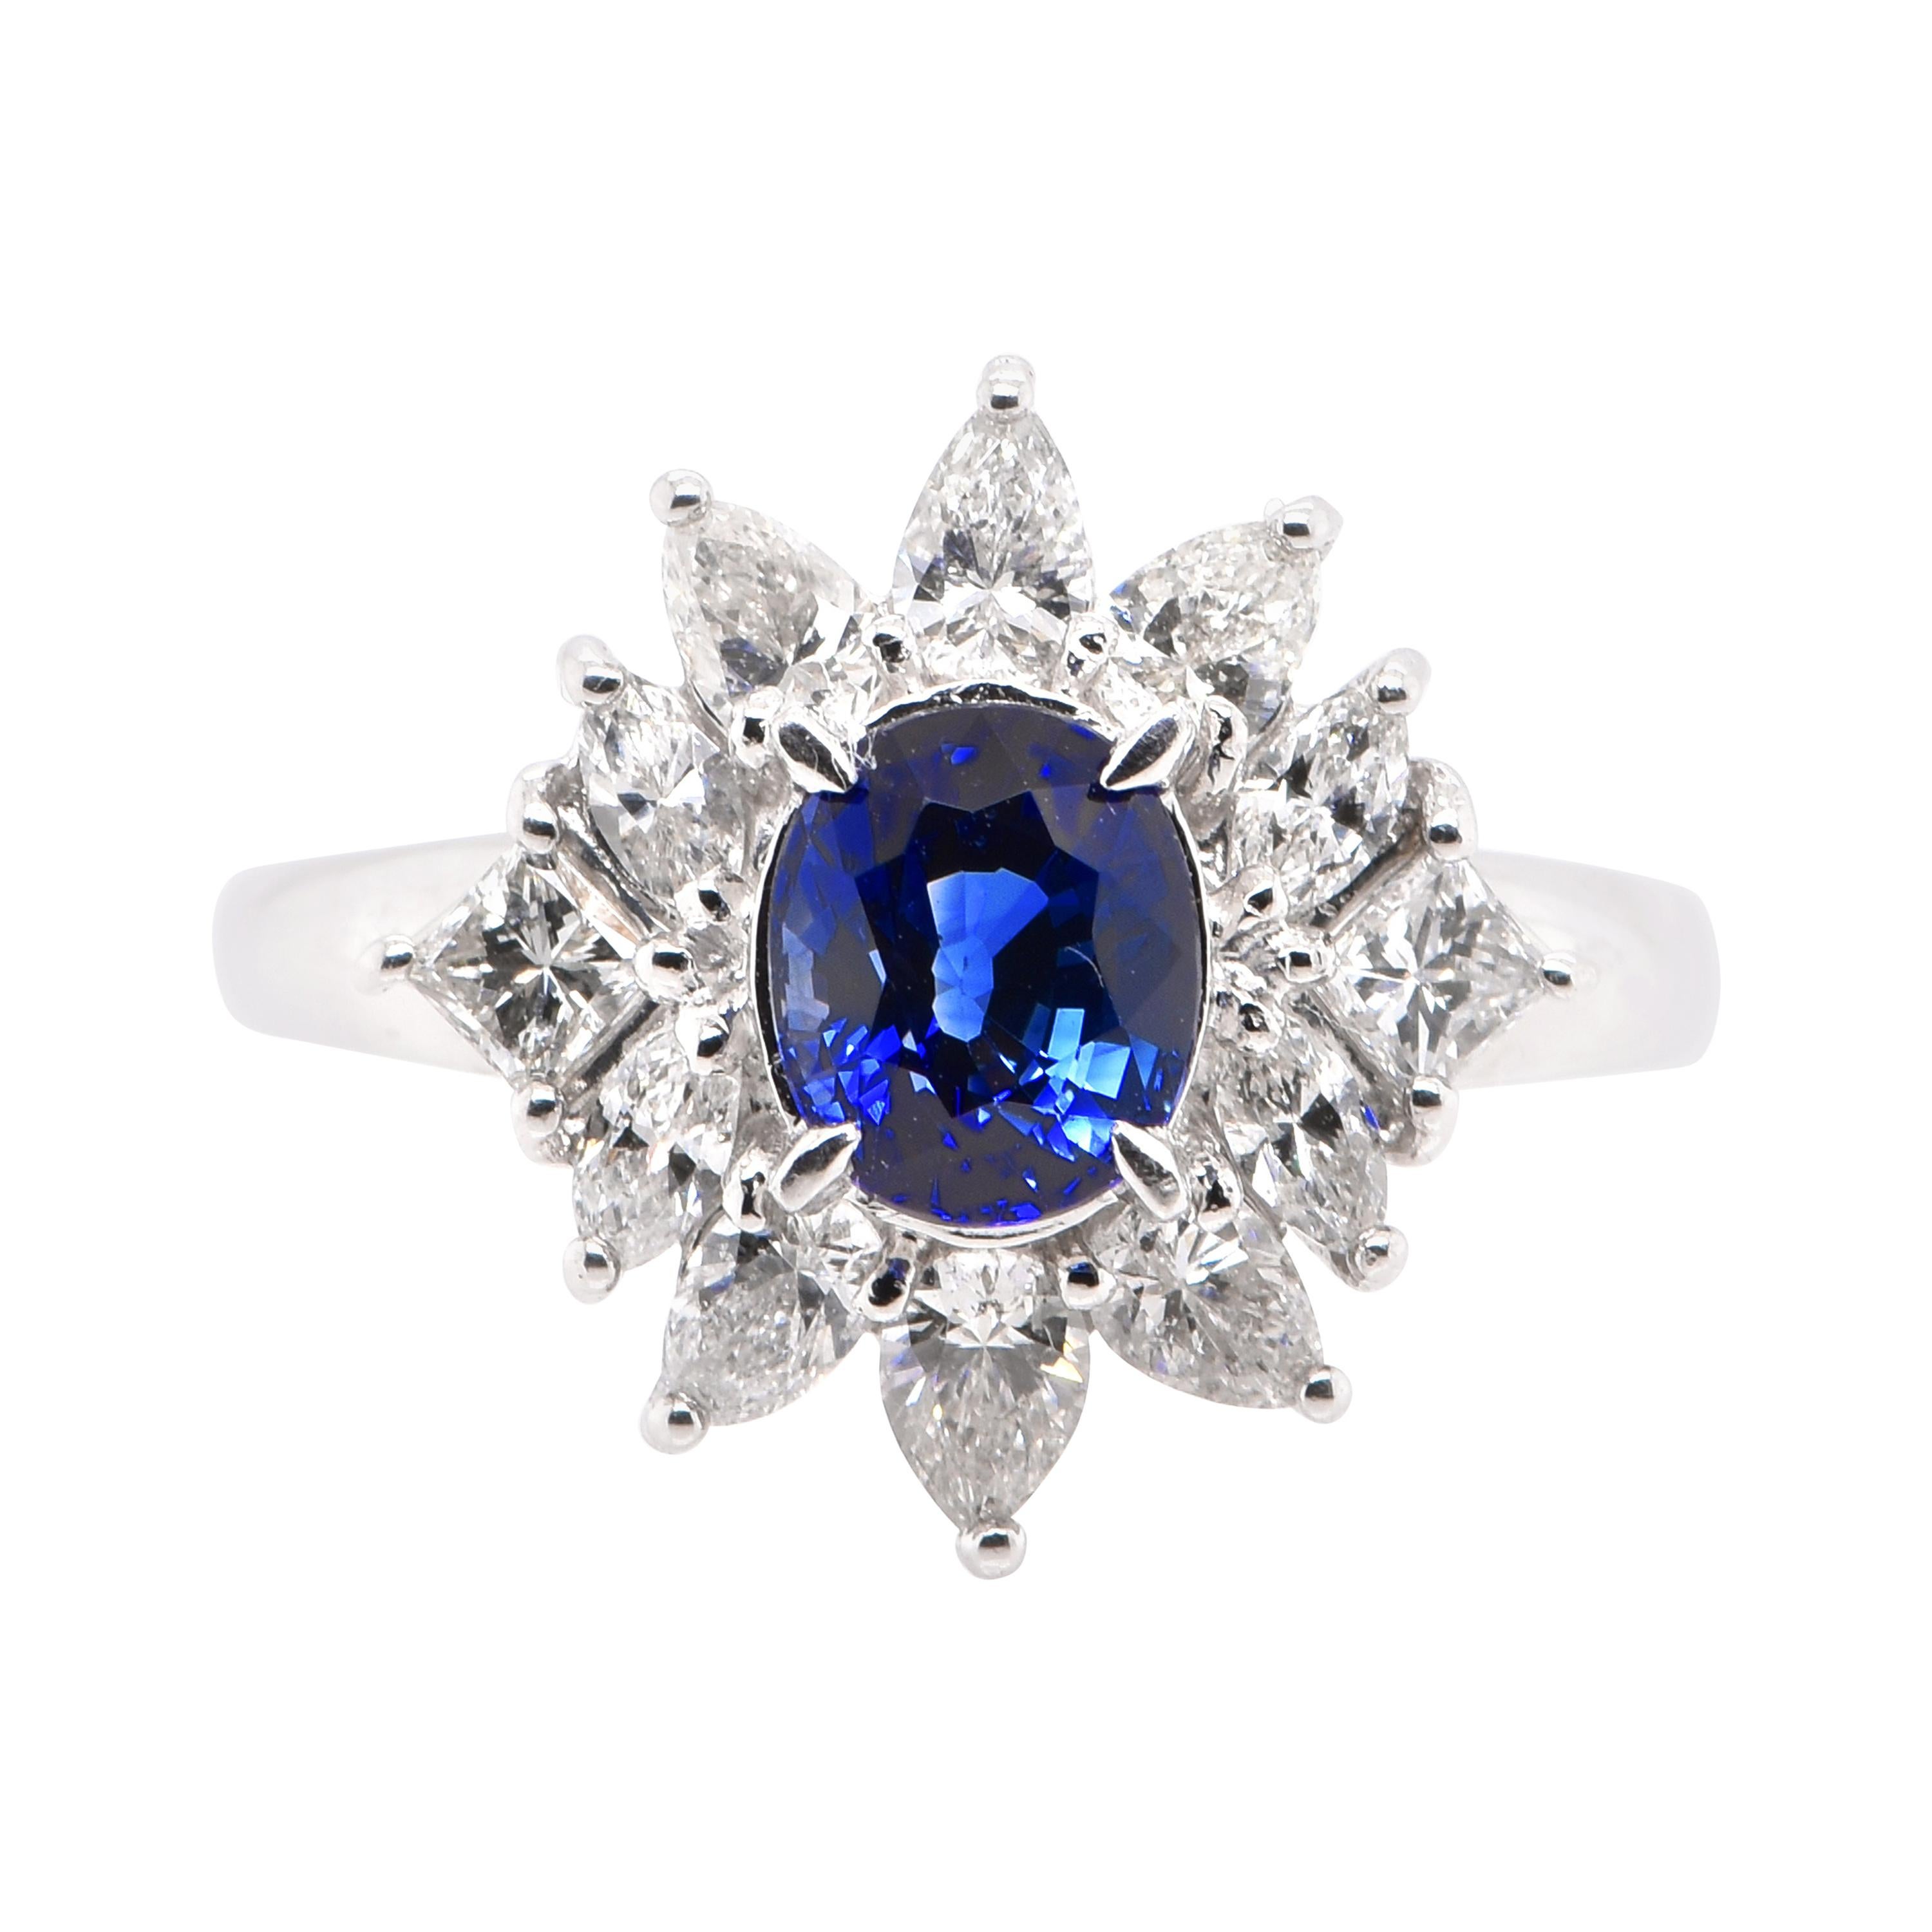 1.11 Carat Natural Royal Blue Sapphire and Diamond Ring Set in Platinum For Sale